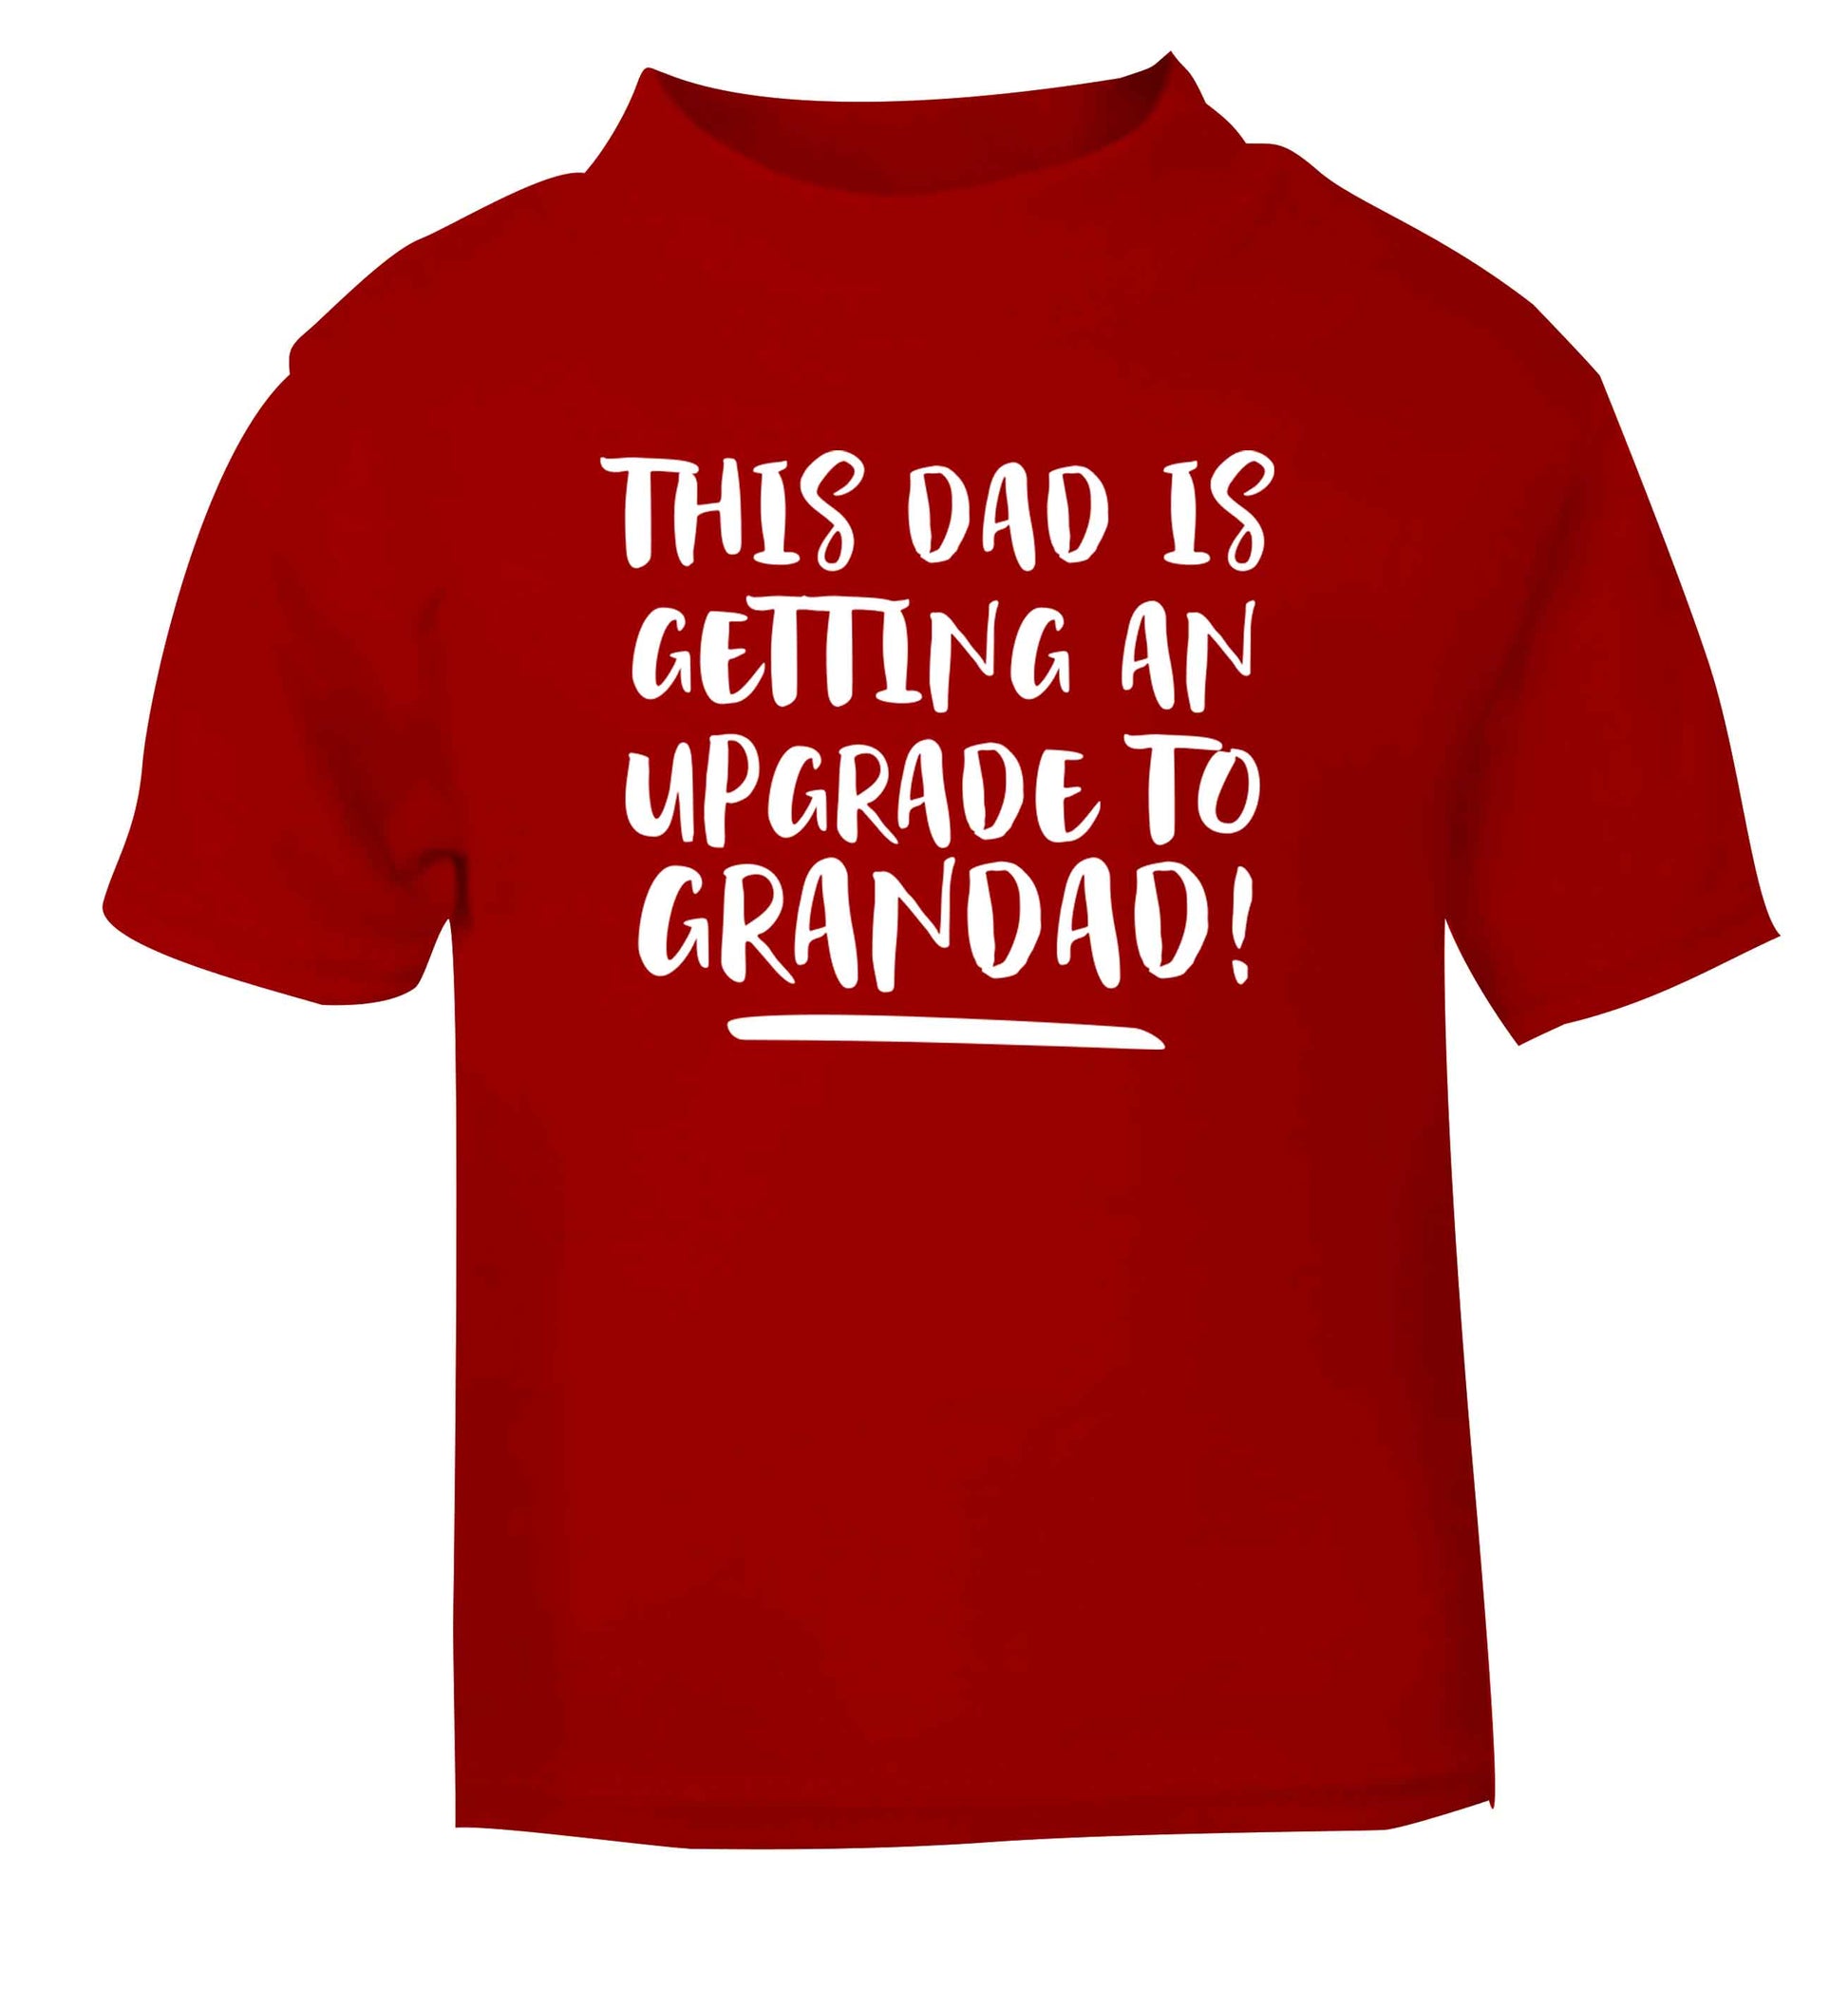 This dad is getting an upgrade to grandad! red Baby Toddler Tshirt 2 Years